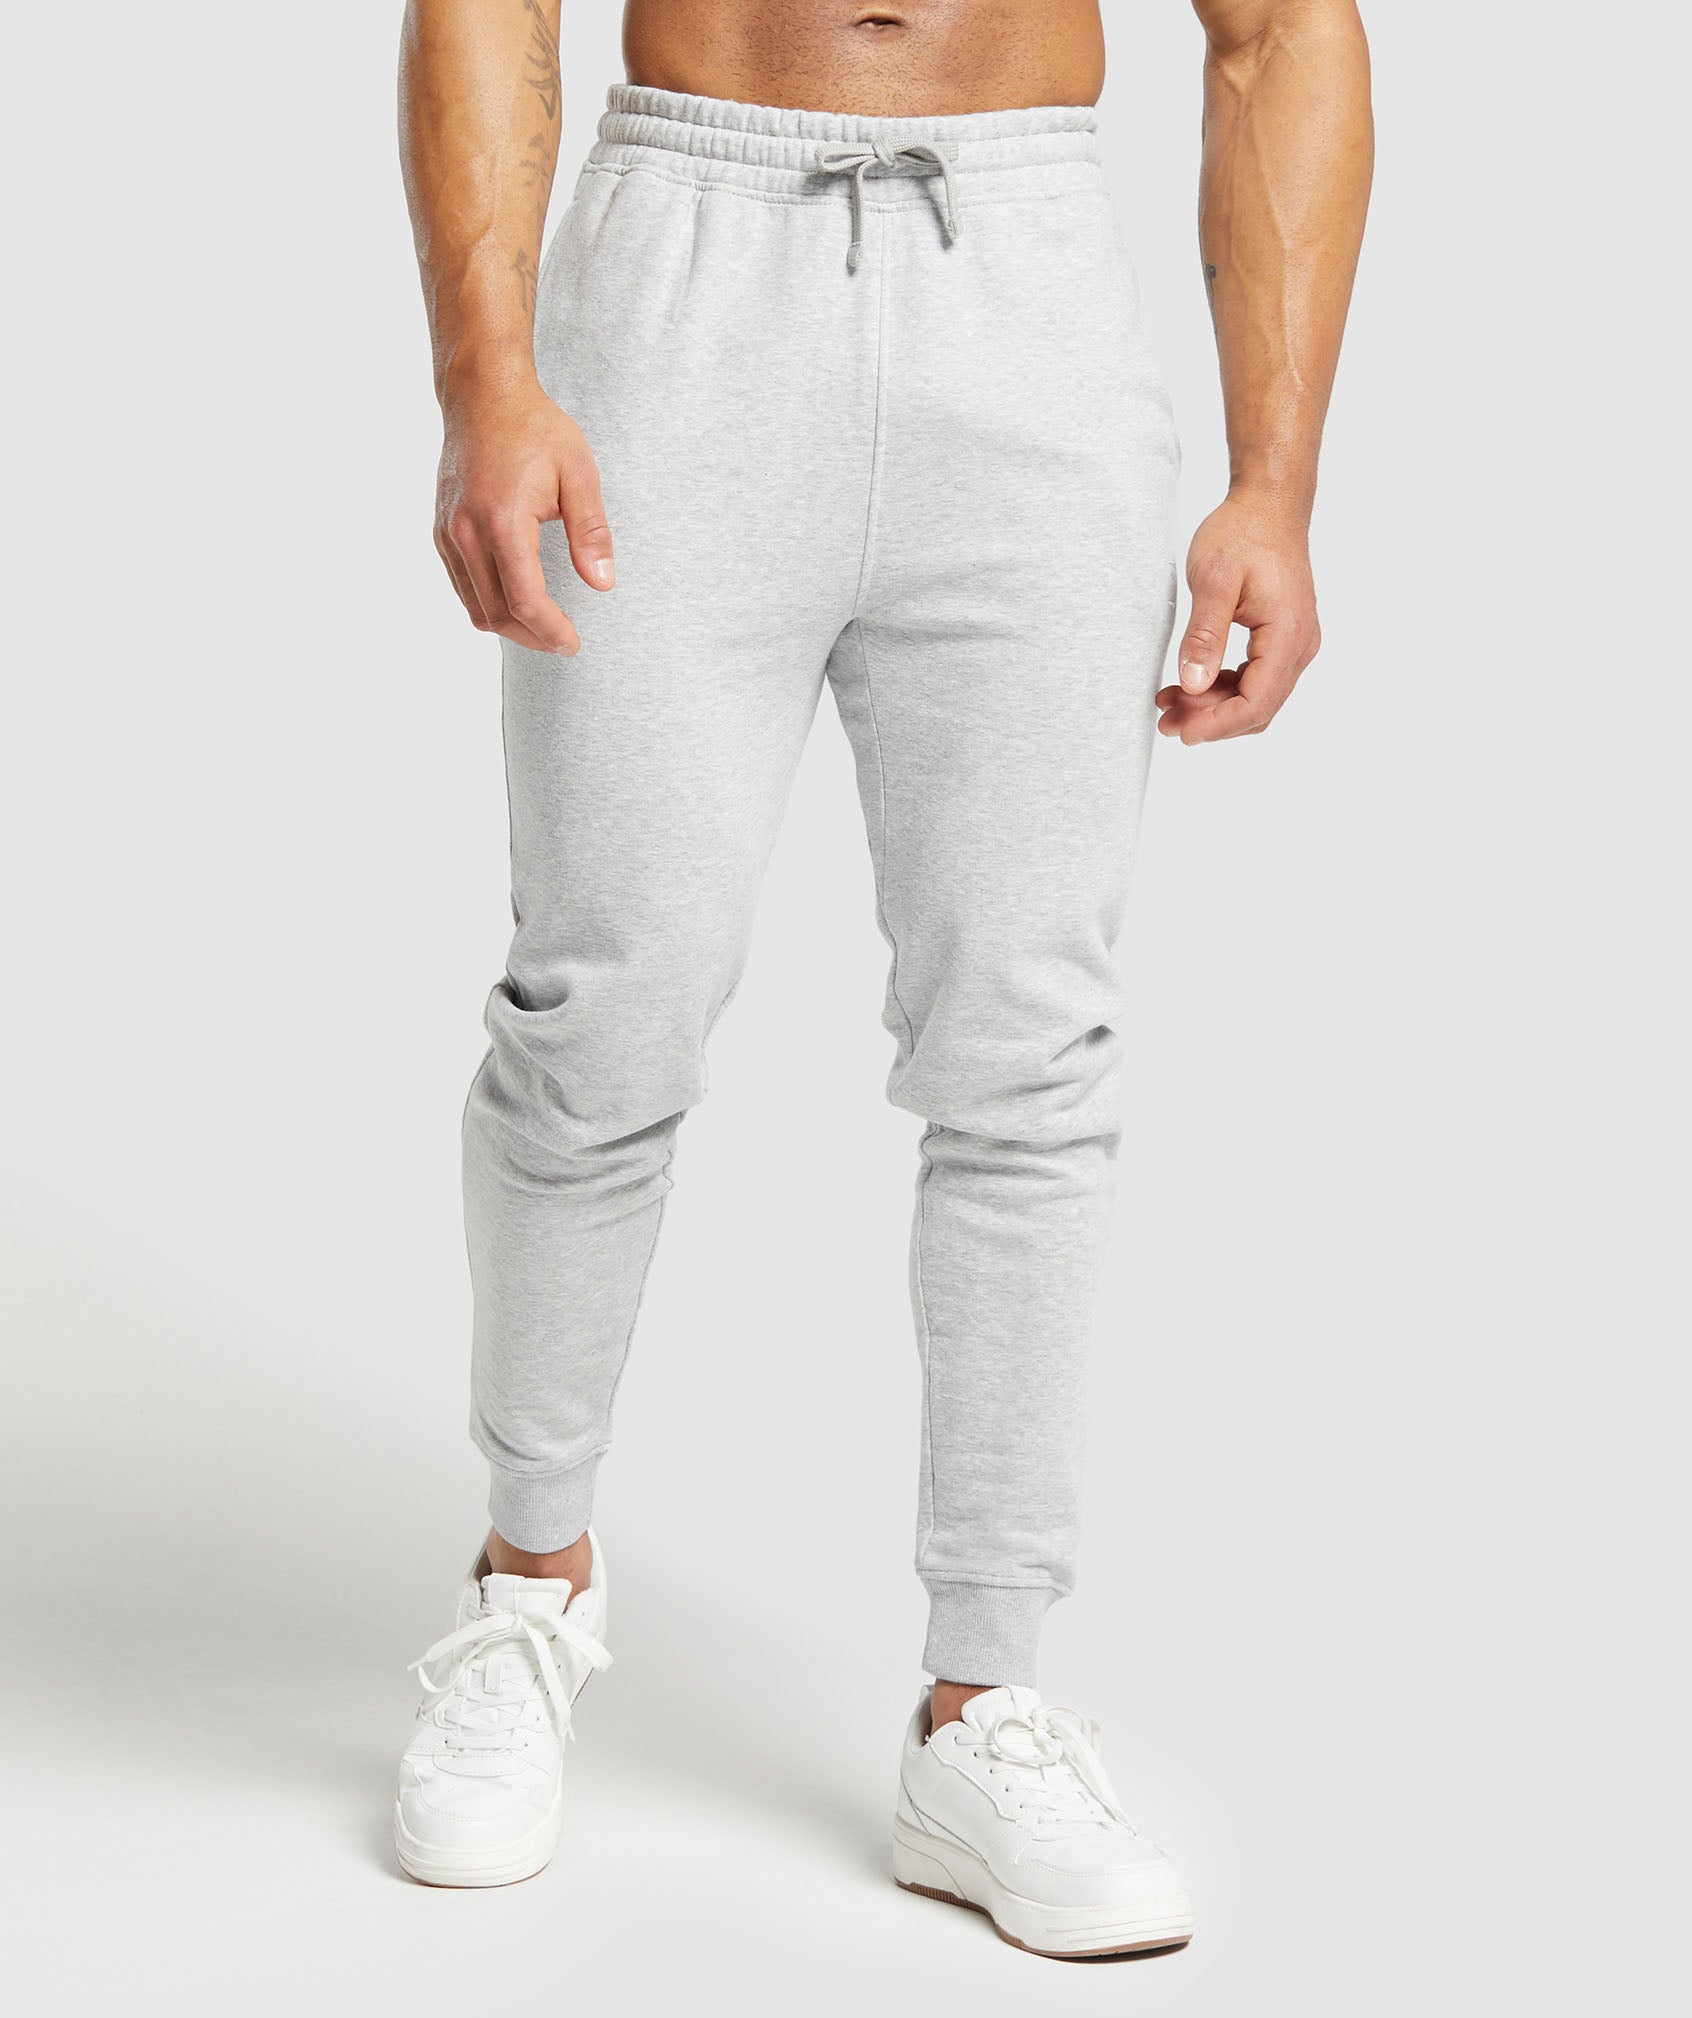 Crest Joggers in Light Grey Marl - view 1